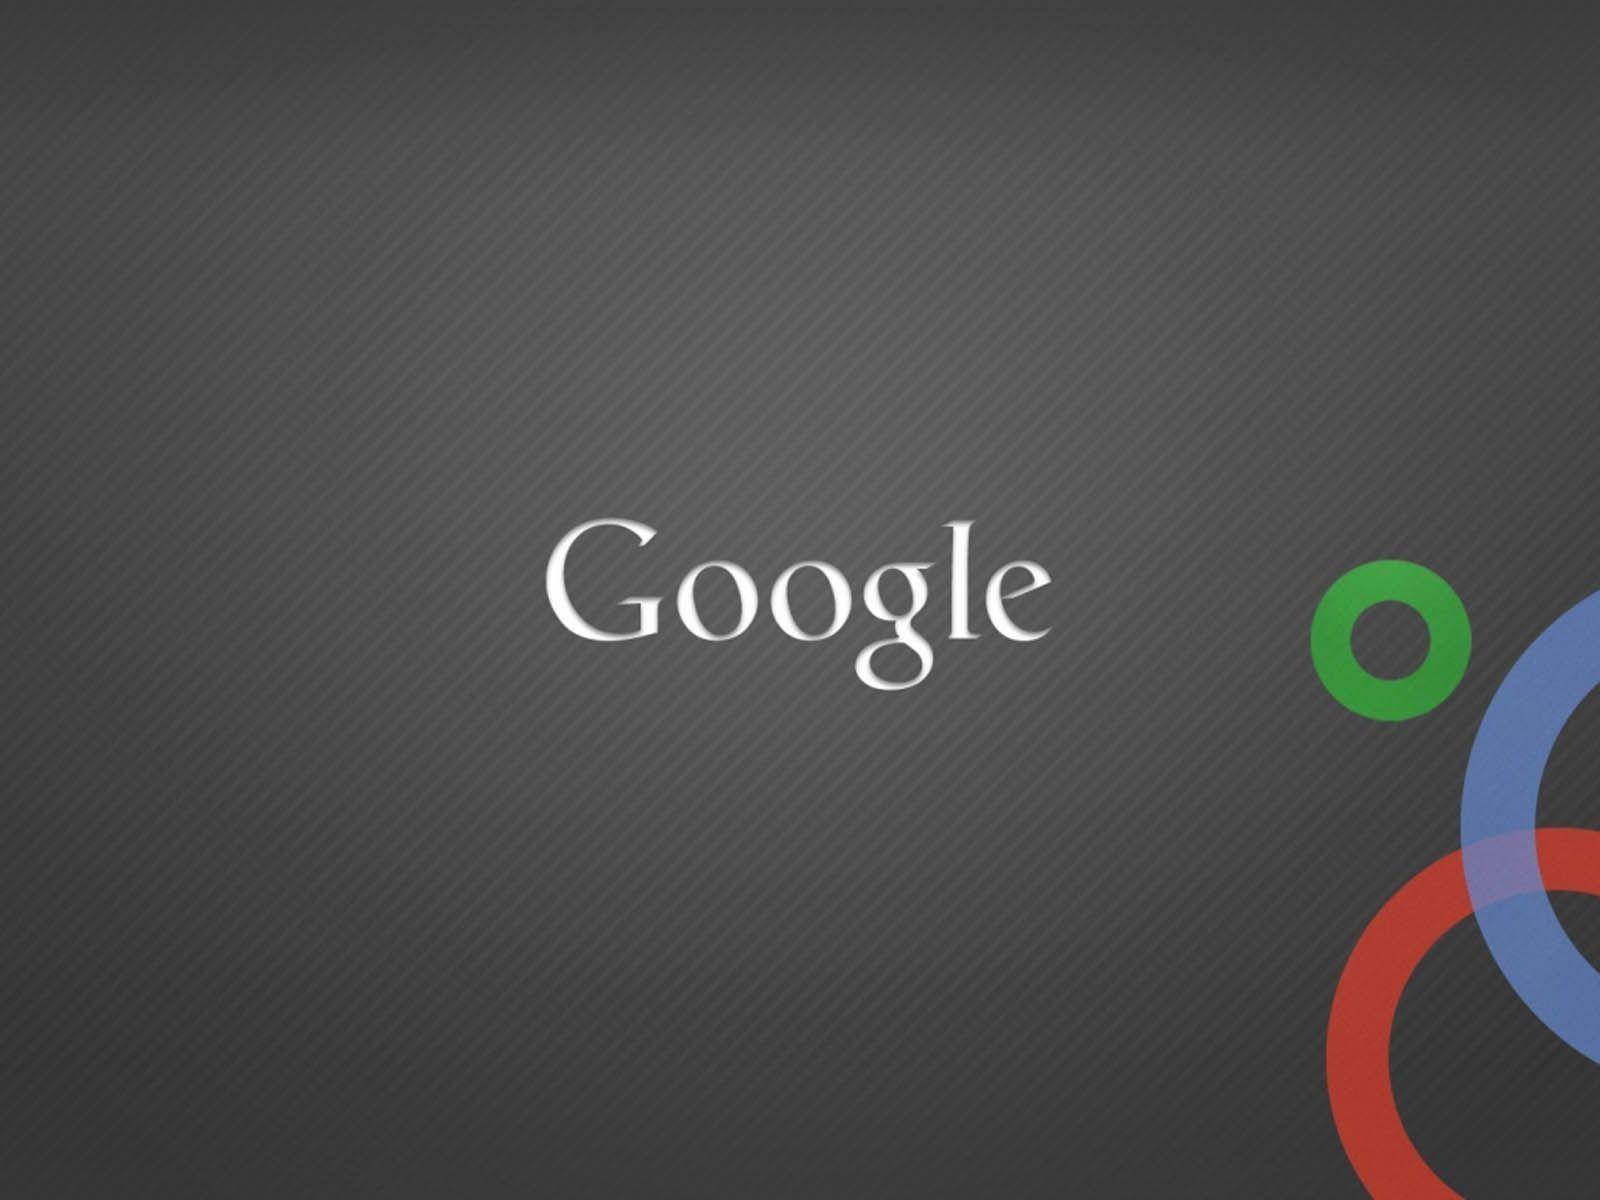 Free Google Wallpapers And Backgrounds - Googleplex - HD Wallpaper 